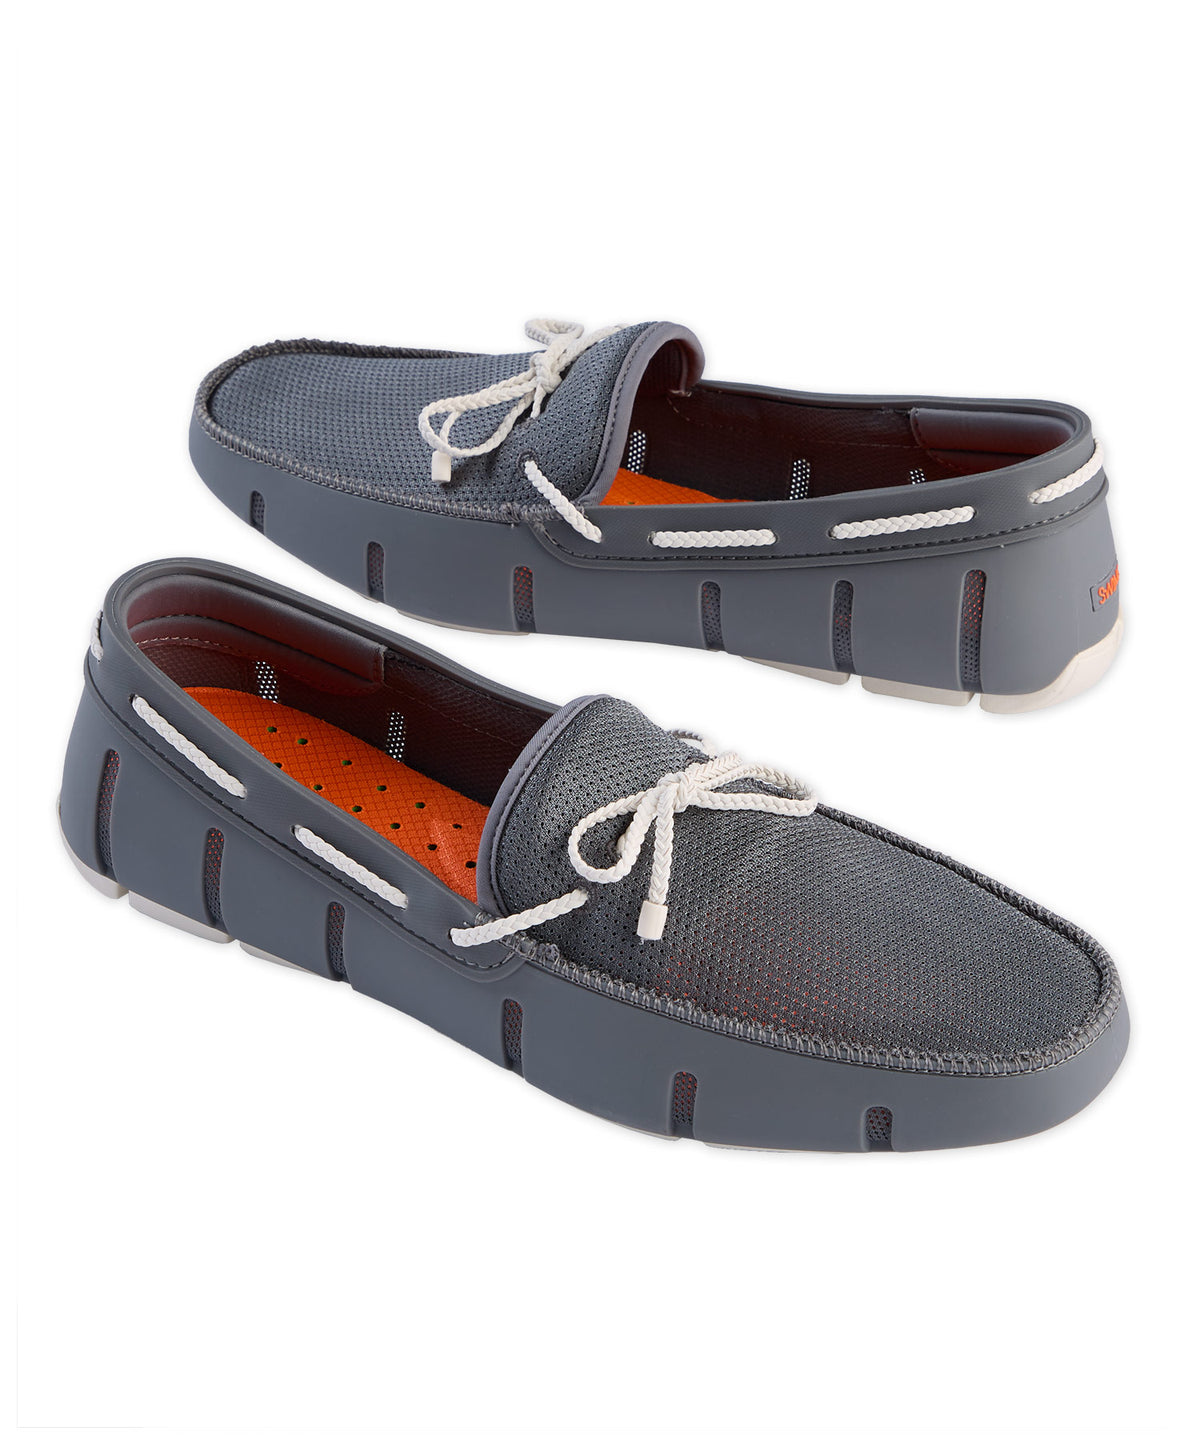 Swims Braided Lace Loafer in Blue for Men